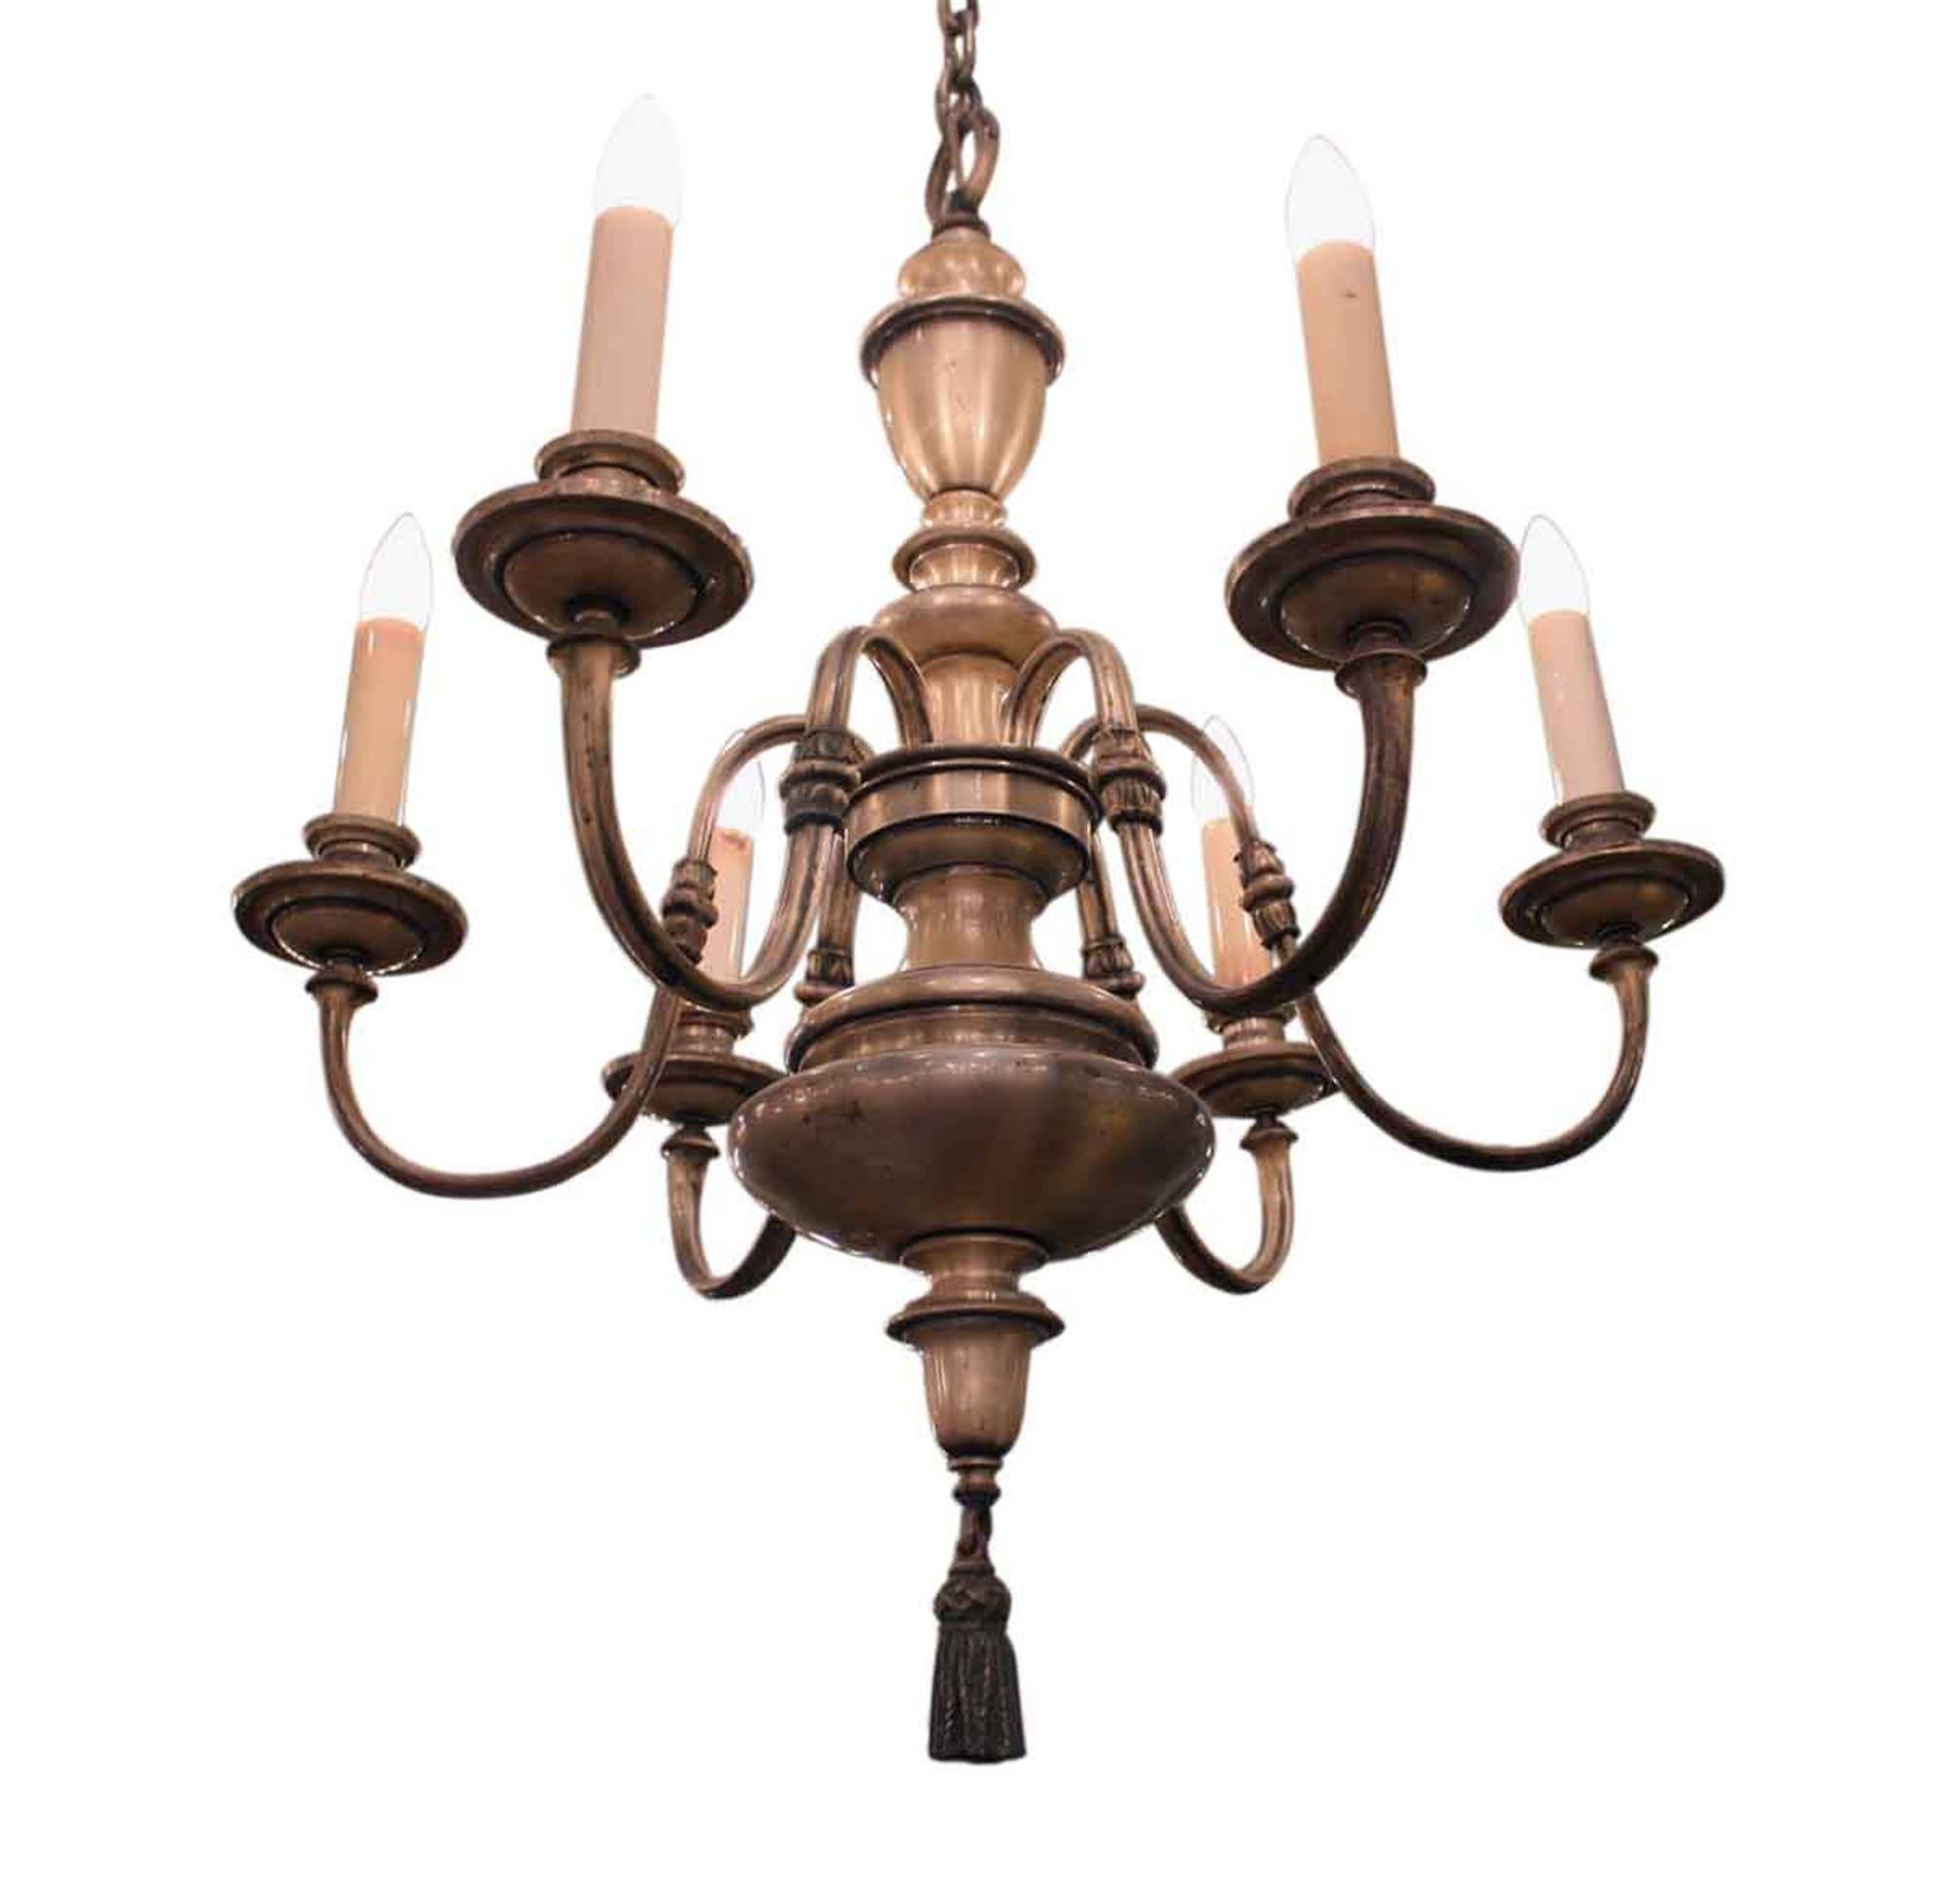 1920s Silver Plated Brass Six-Arm Chandelier with a Tassel Finial